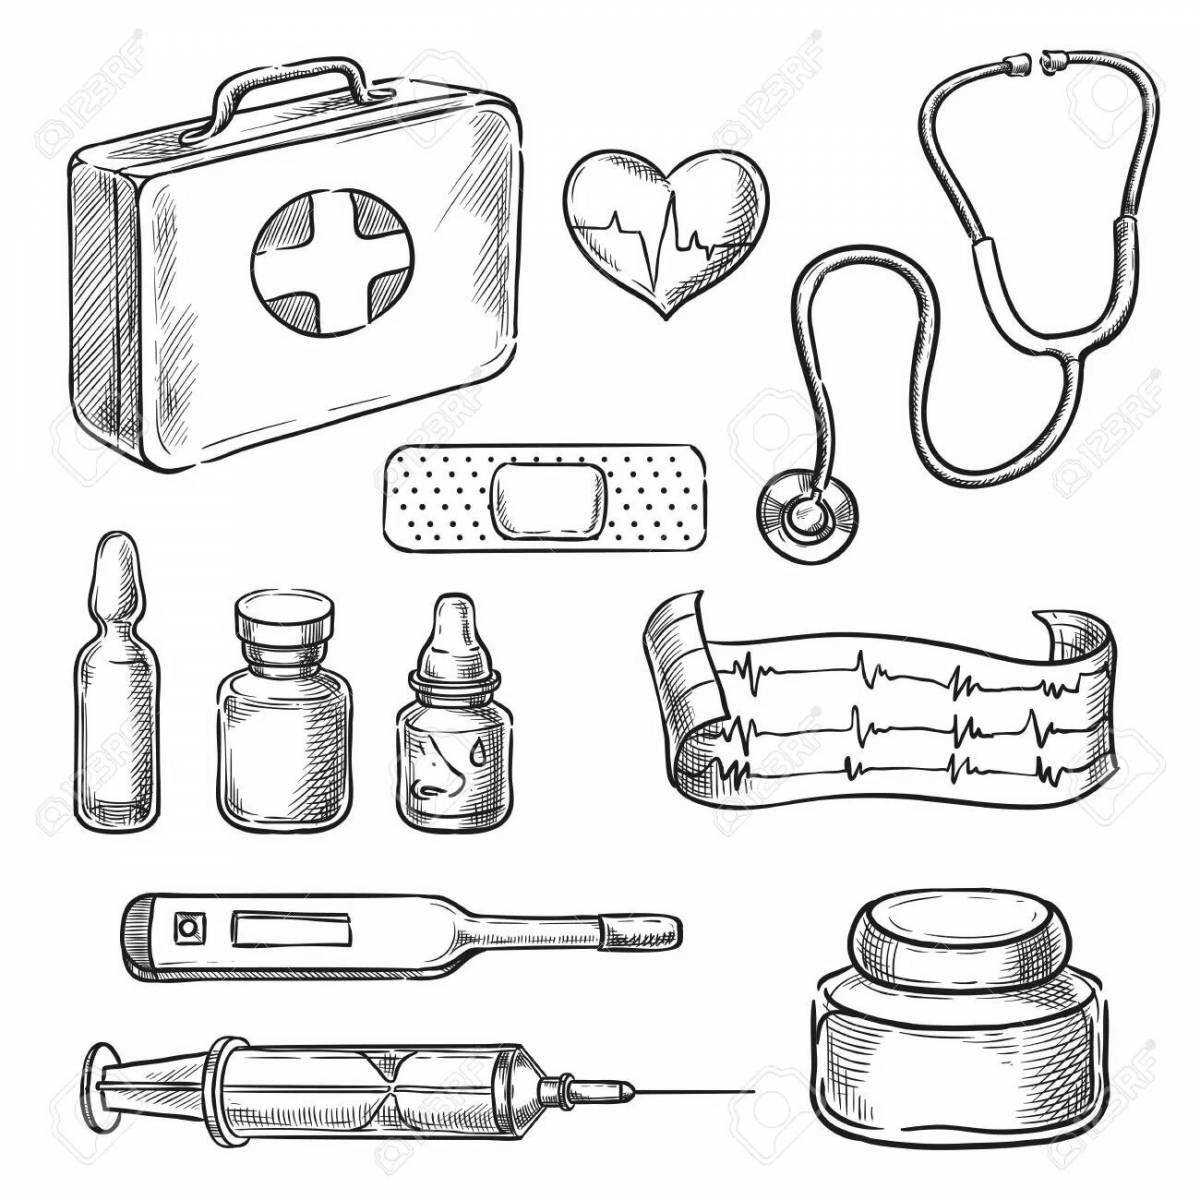 Colourful medical instruments coloring book